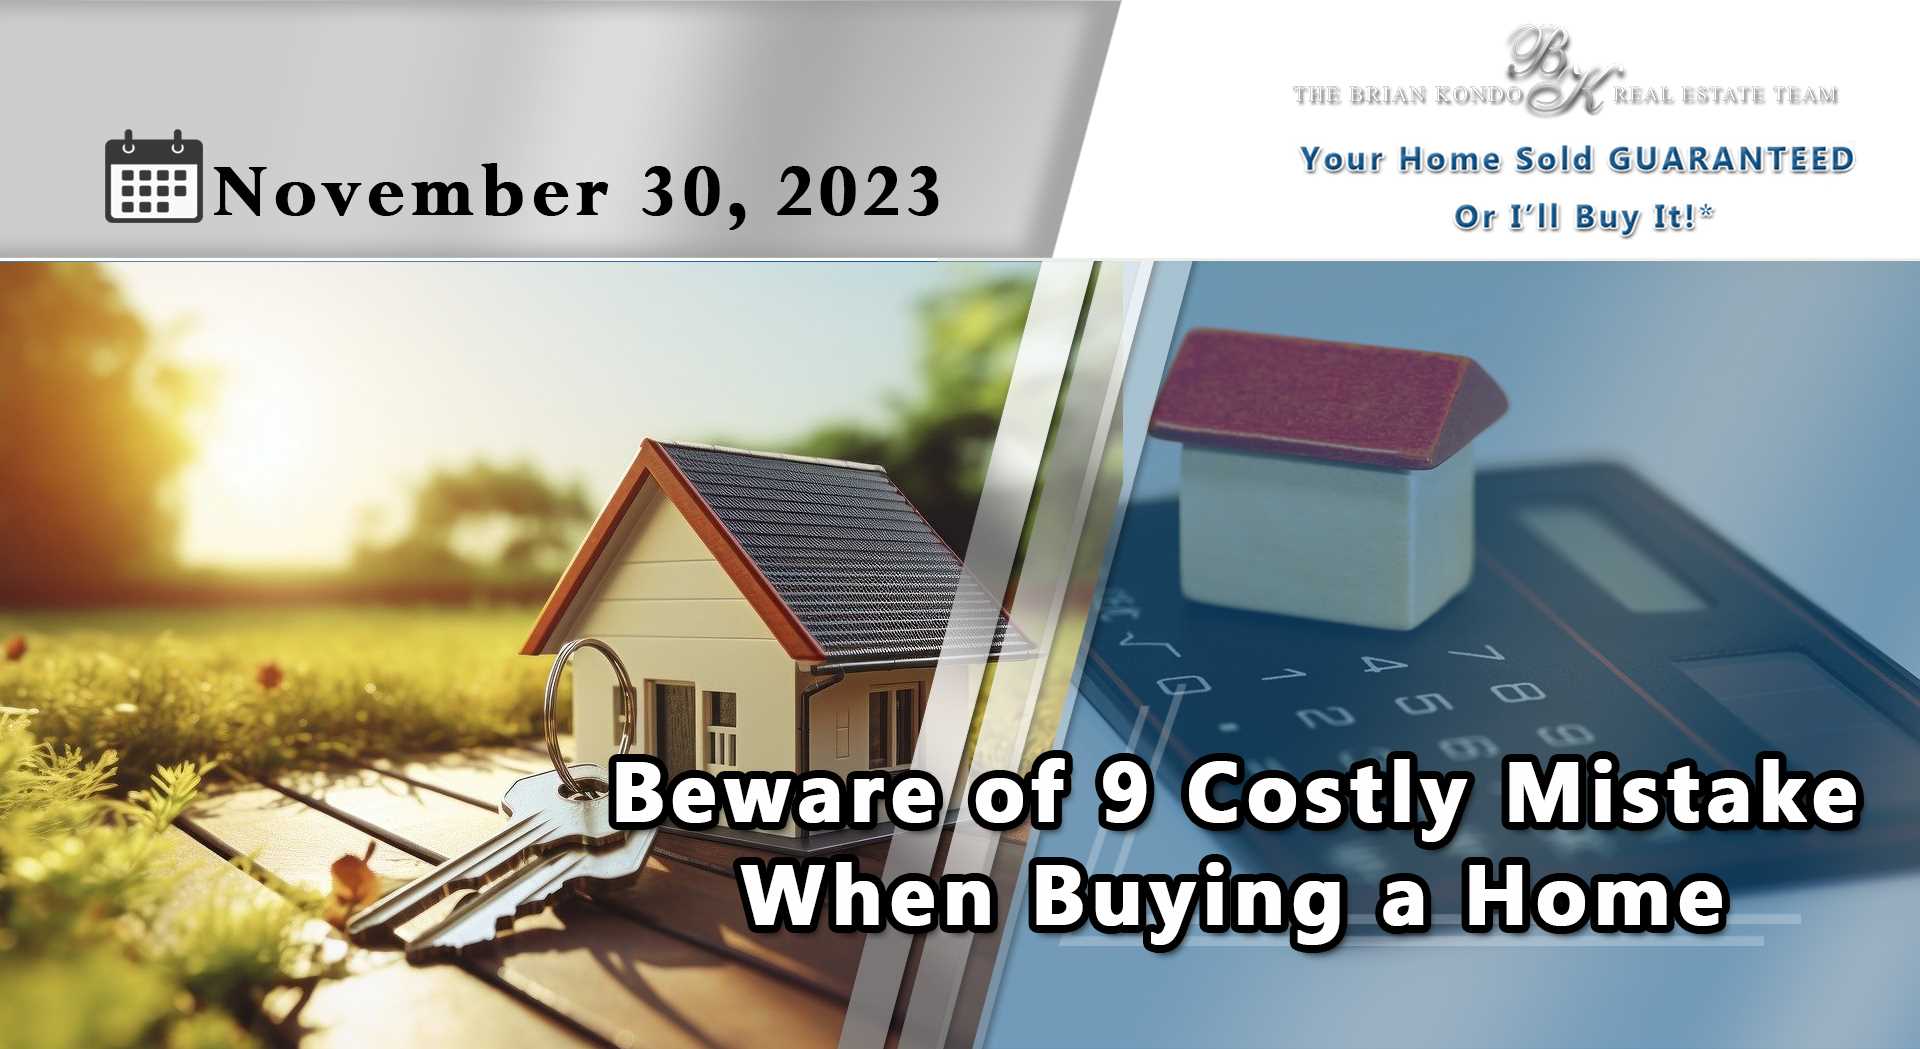 Beware of 9 Costly Mistakes When Buying a Home